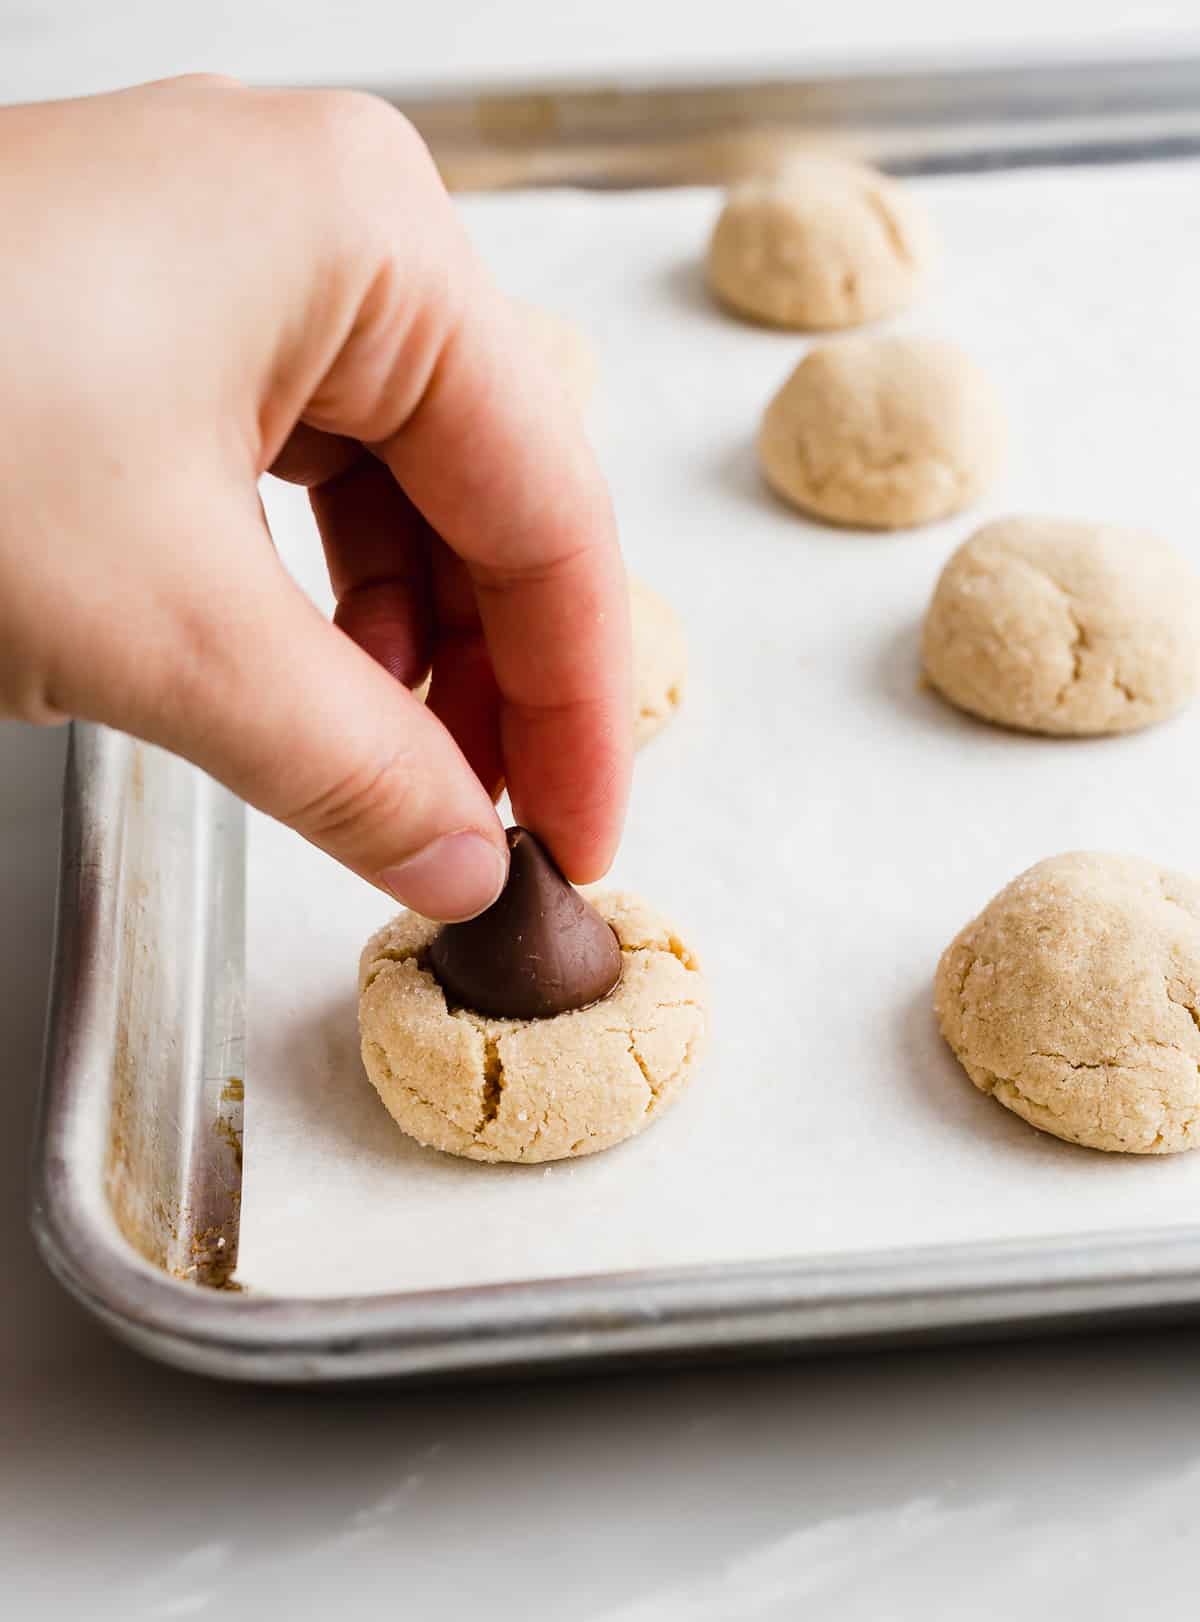 A hand pressing a chocolate Hershey's kiss into a peanut butter cookie on a baking sheet.